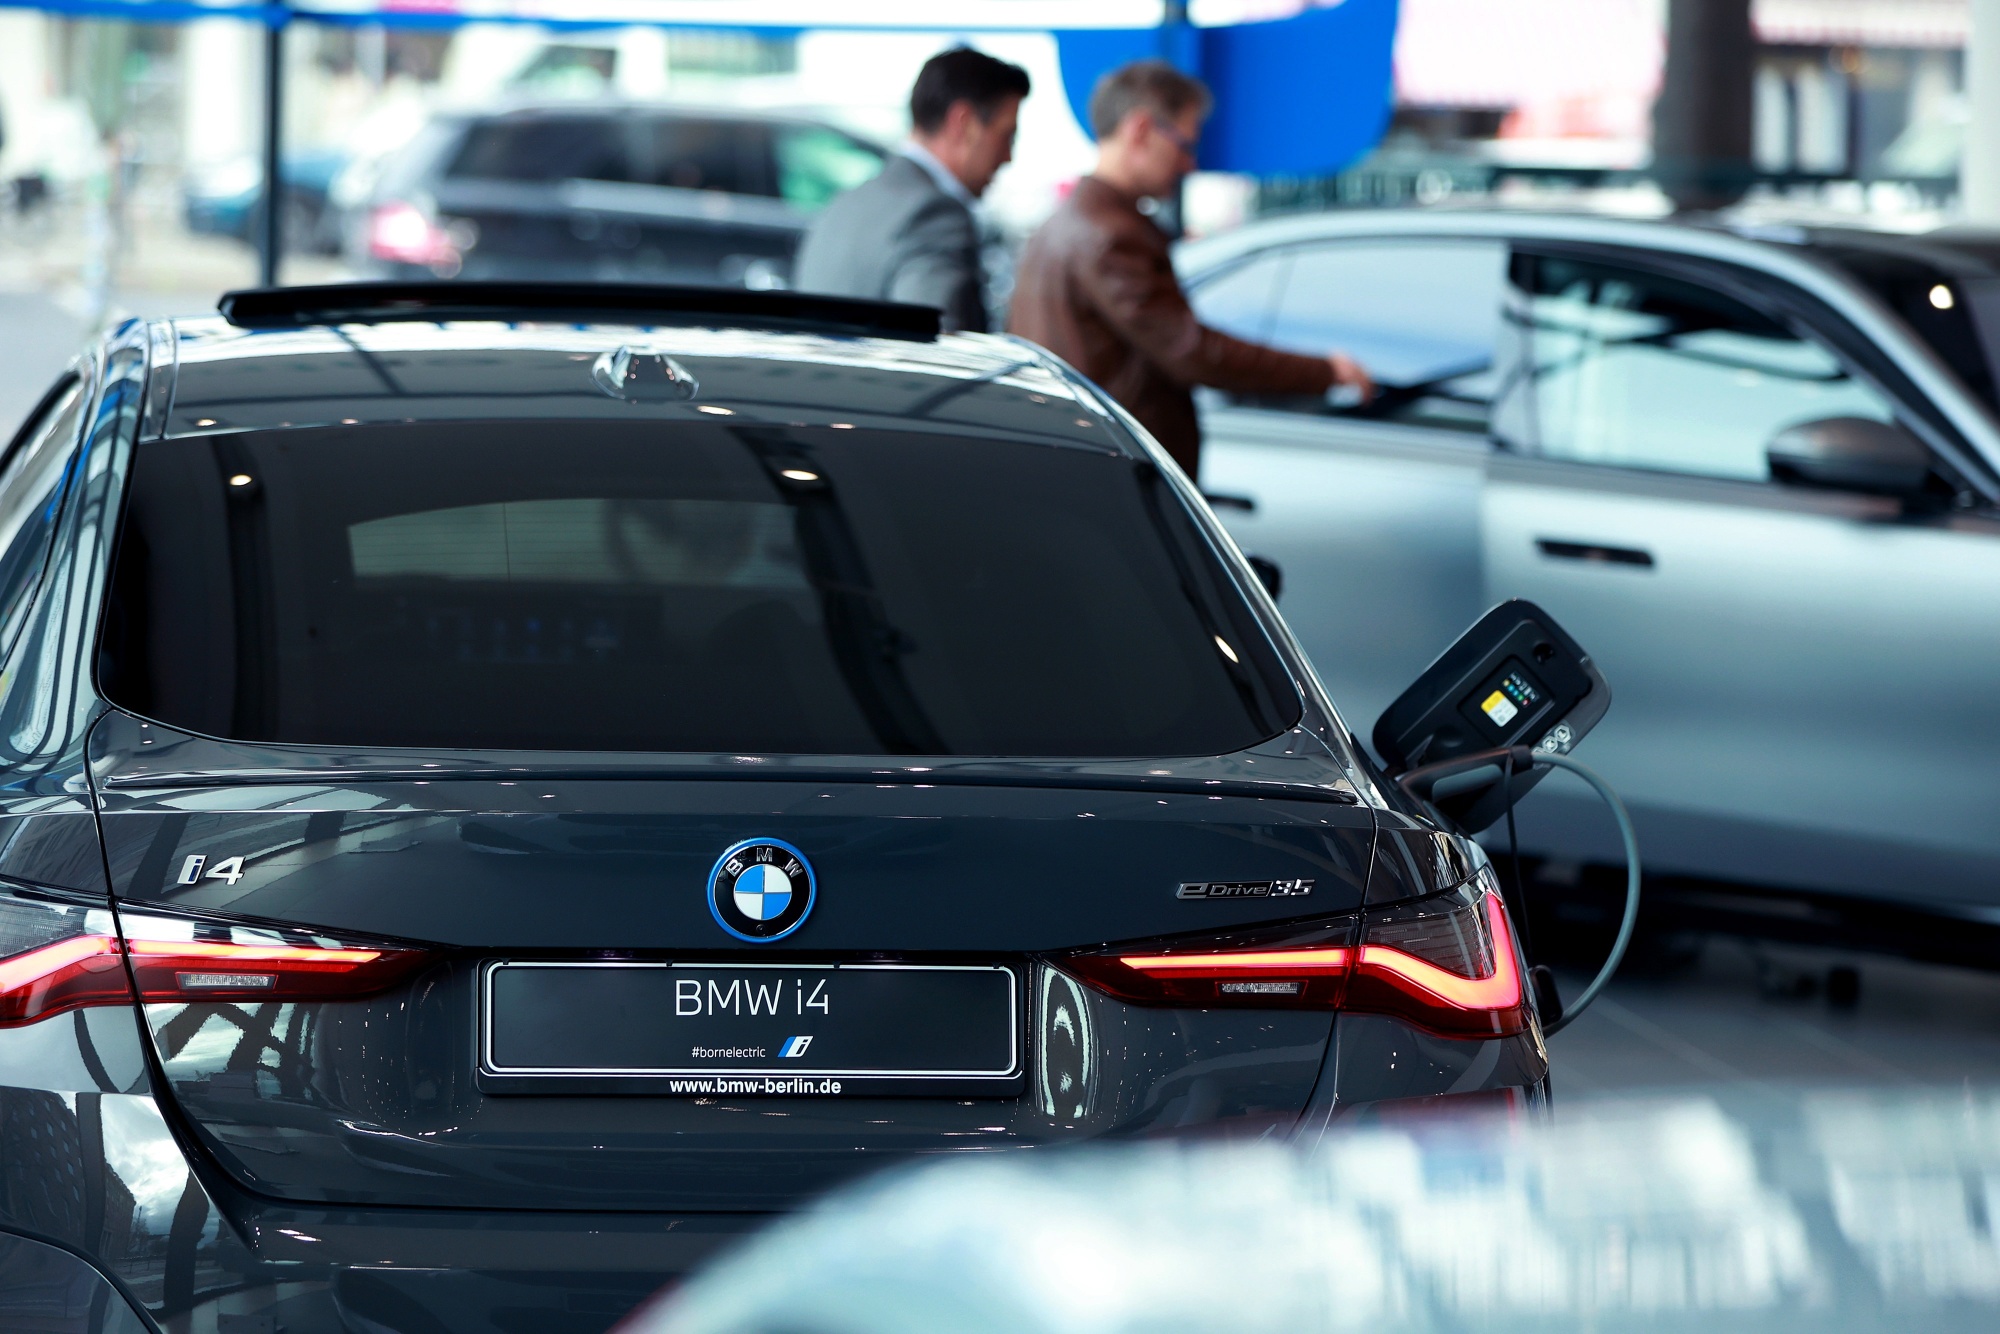 BMW Sees Strong Europe Electric Car Demand, Starts i5 Production - Bloomberg